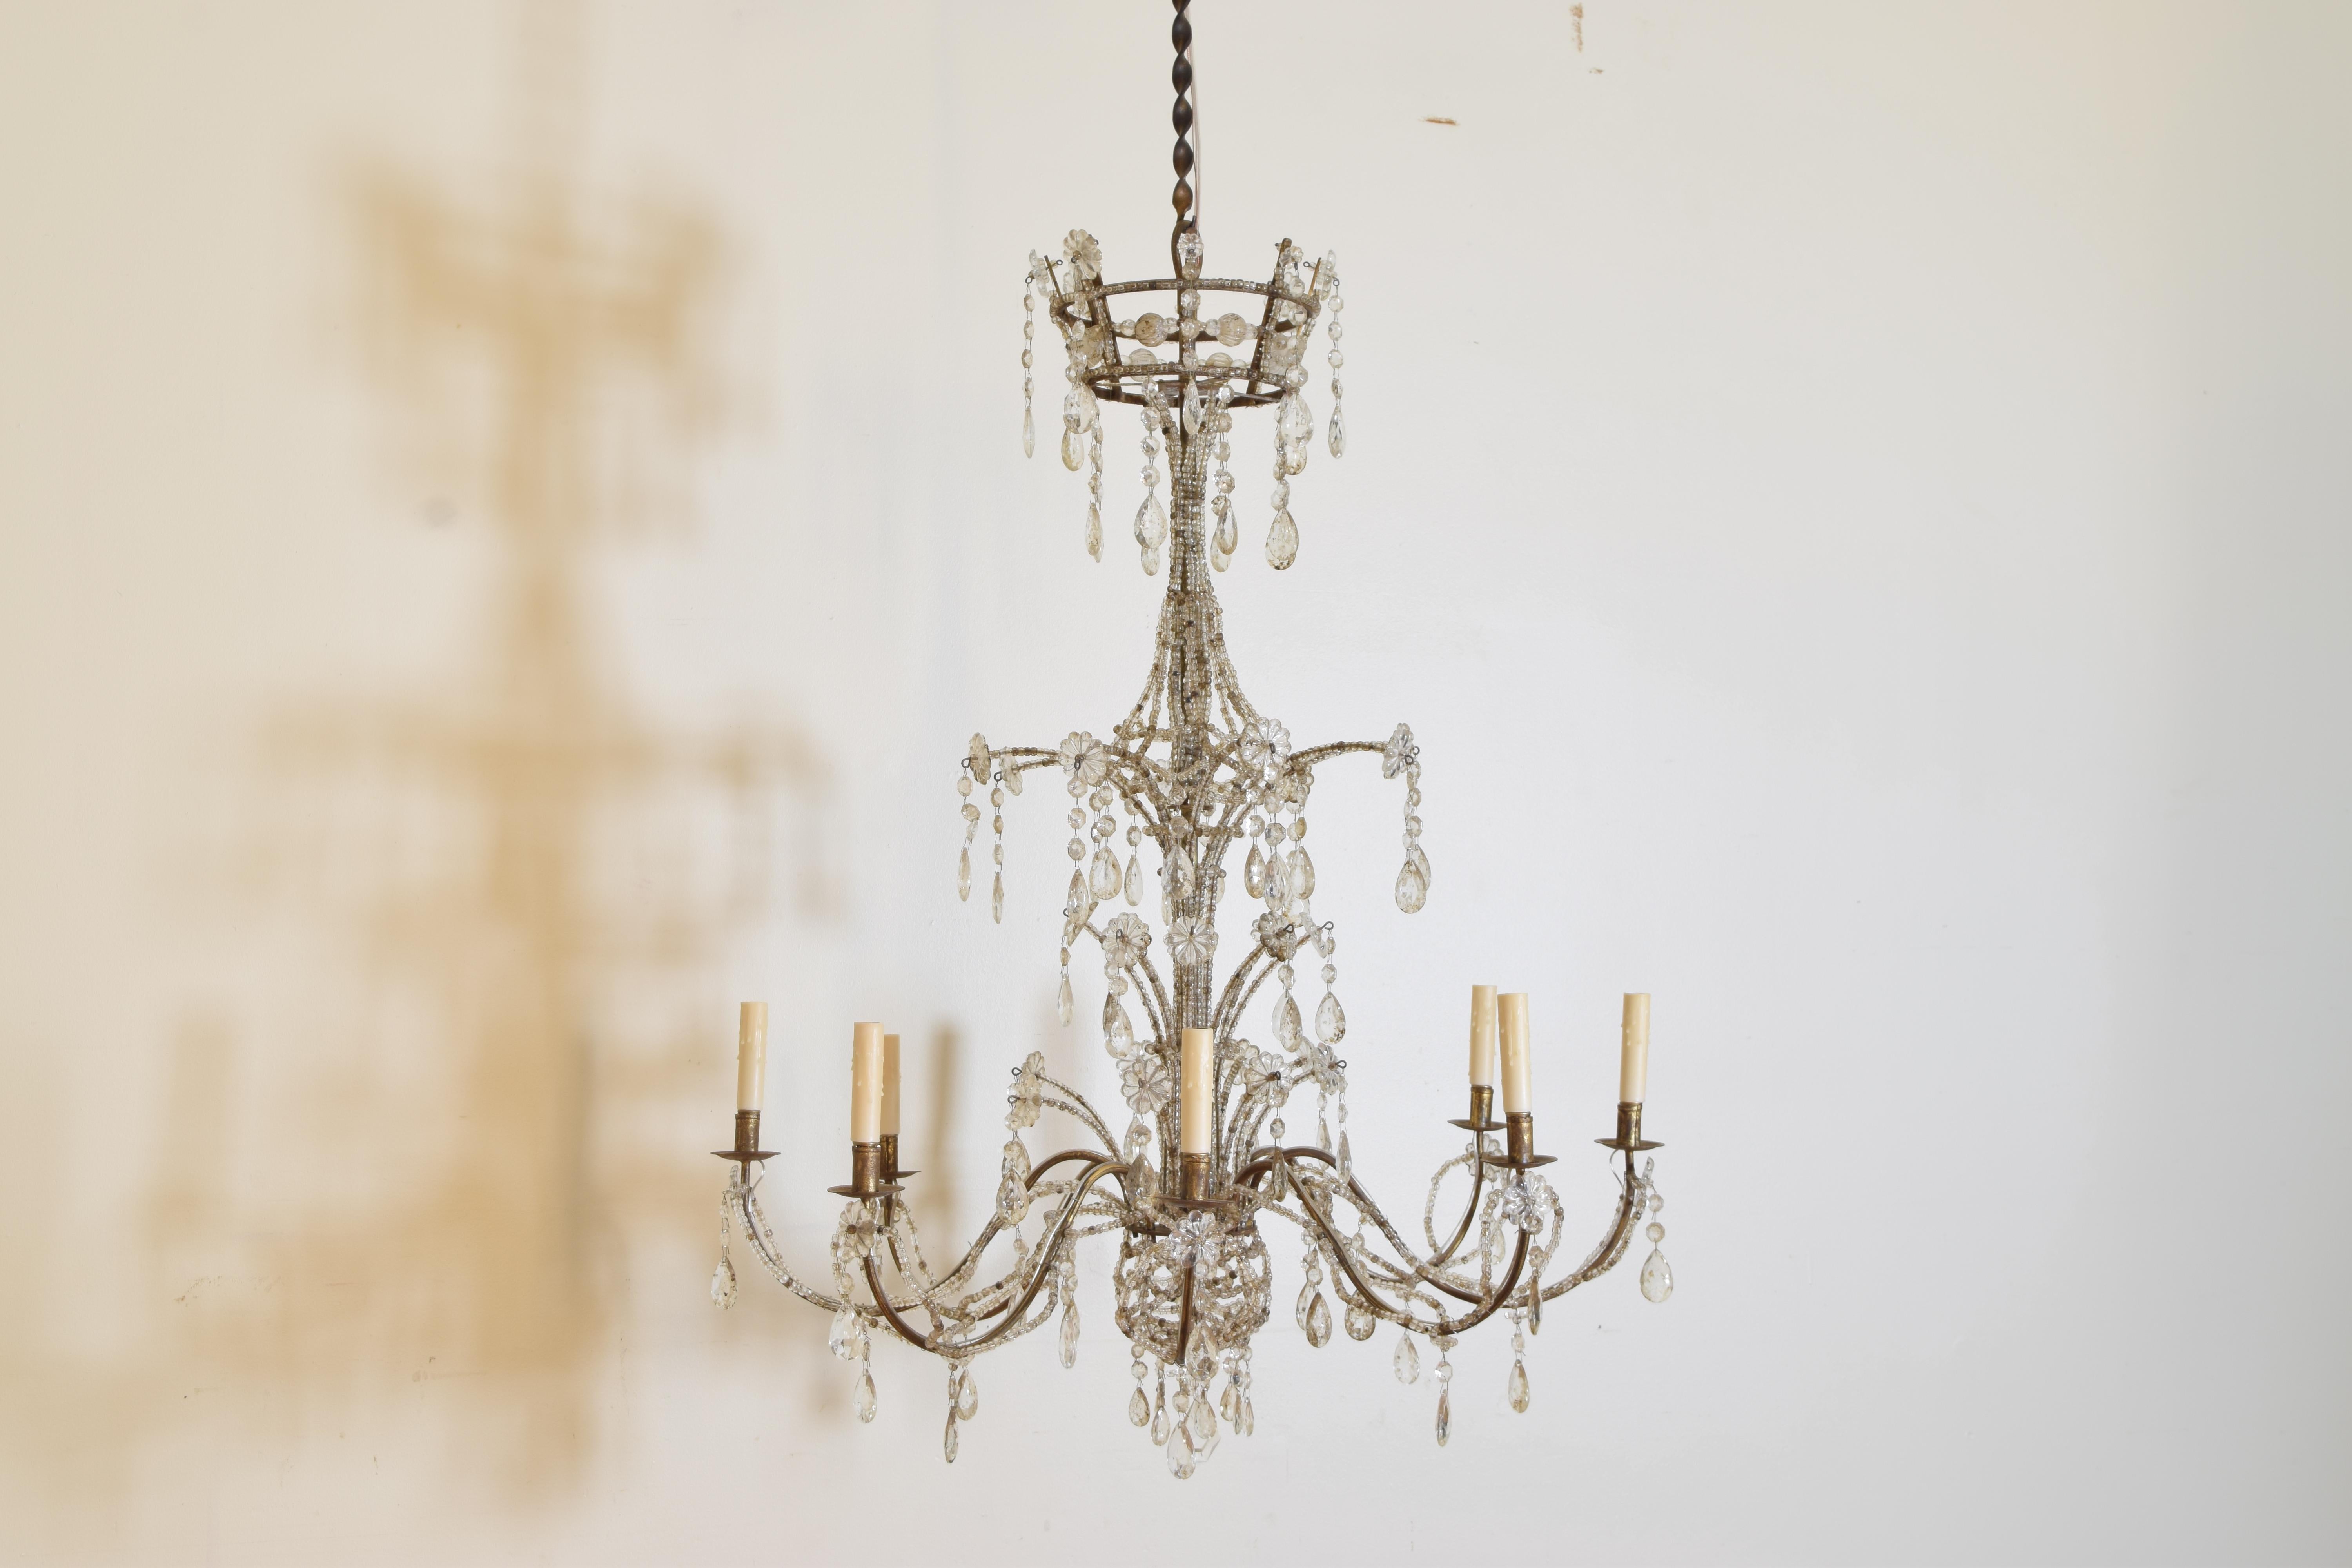 Other Pair of Italian Genovese Gilt Iron & Glass 8-Light Chandeliers, Mid-20th Century